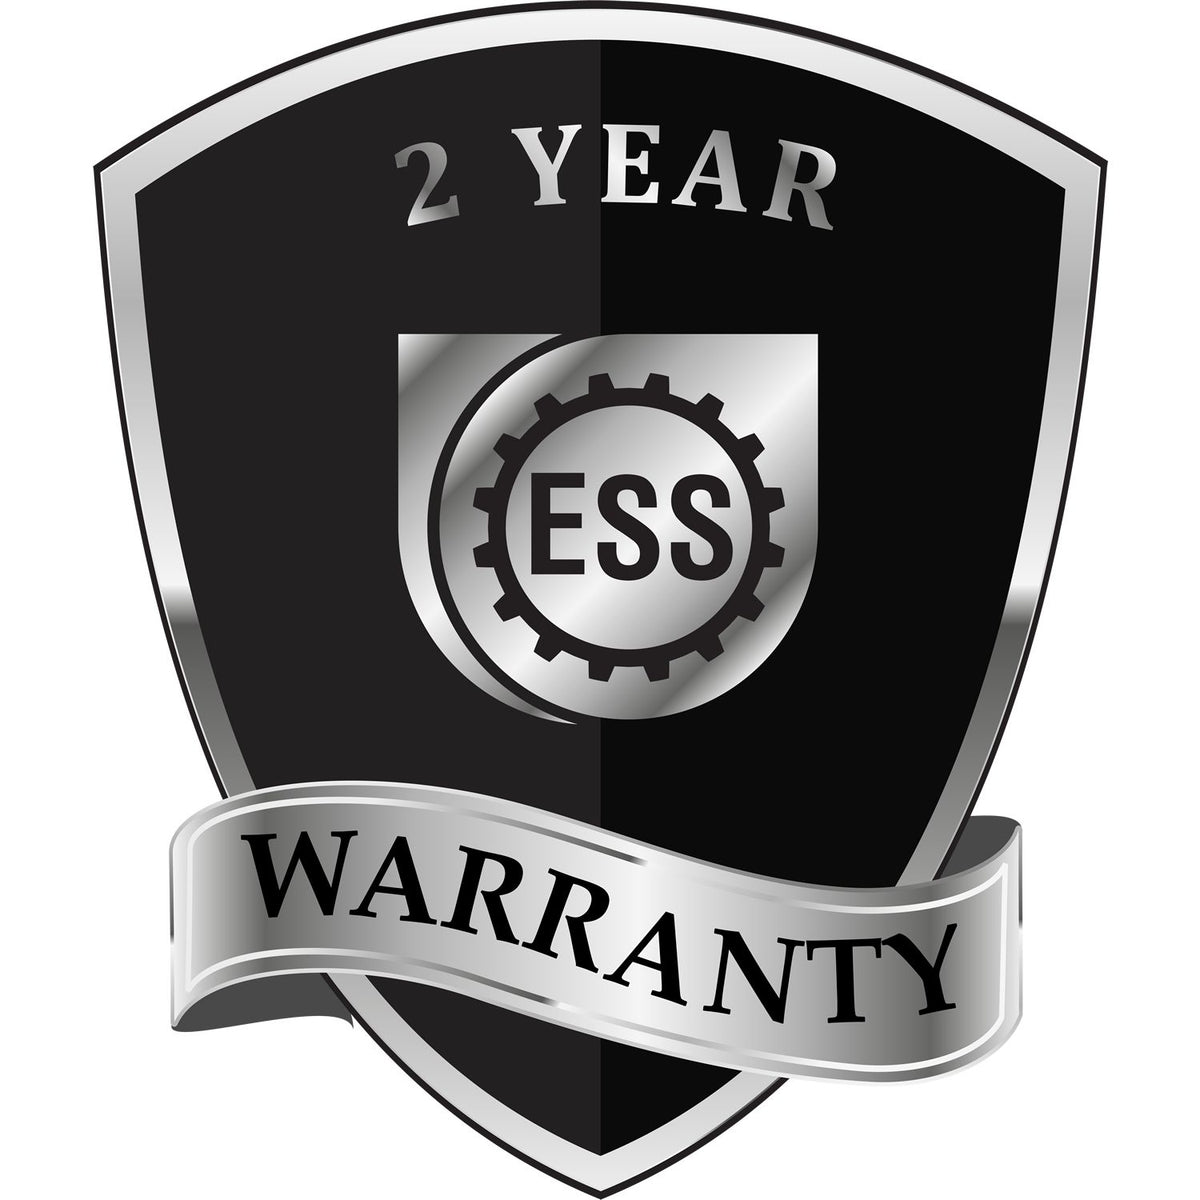 A black and silver badge or emblem showing warranty information for the Soft Guam Professional Geologist Seal